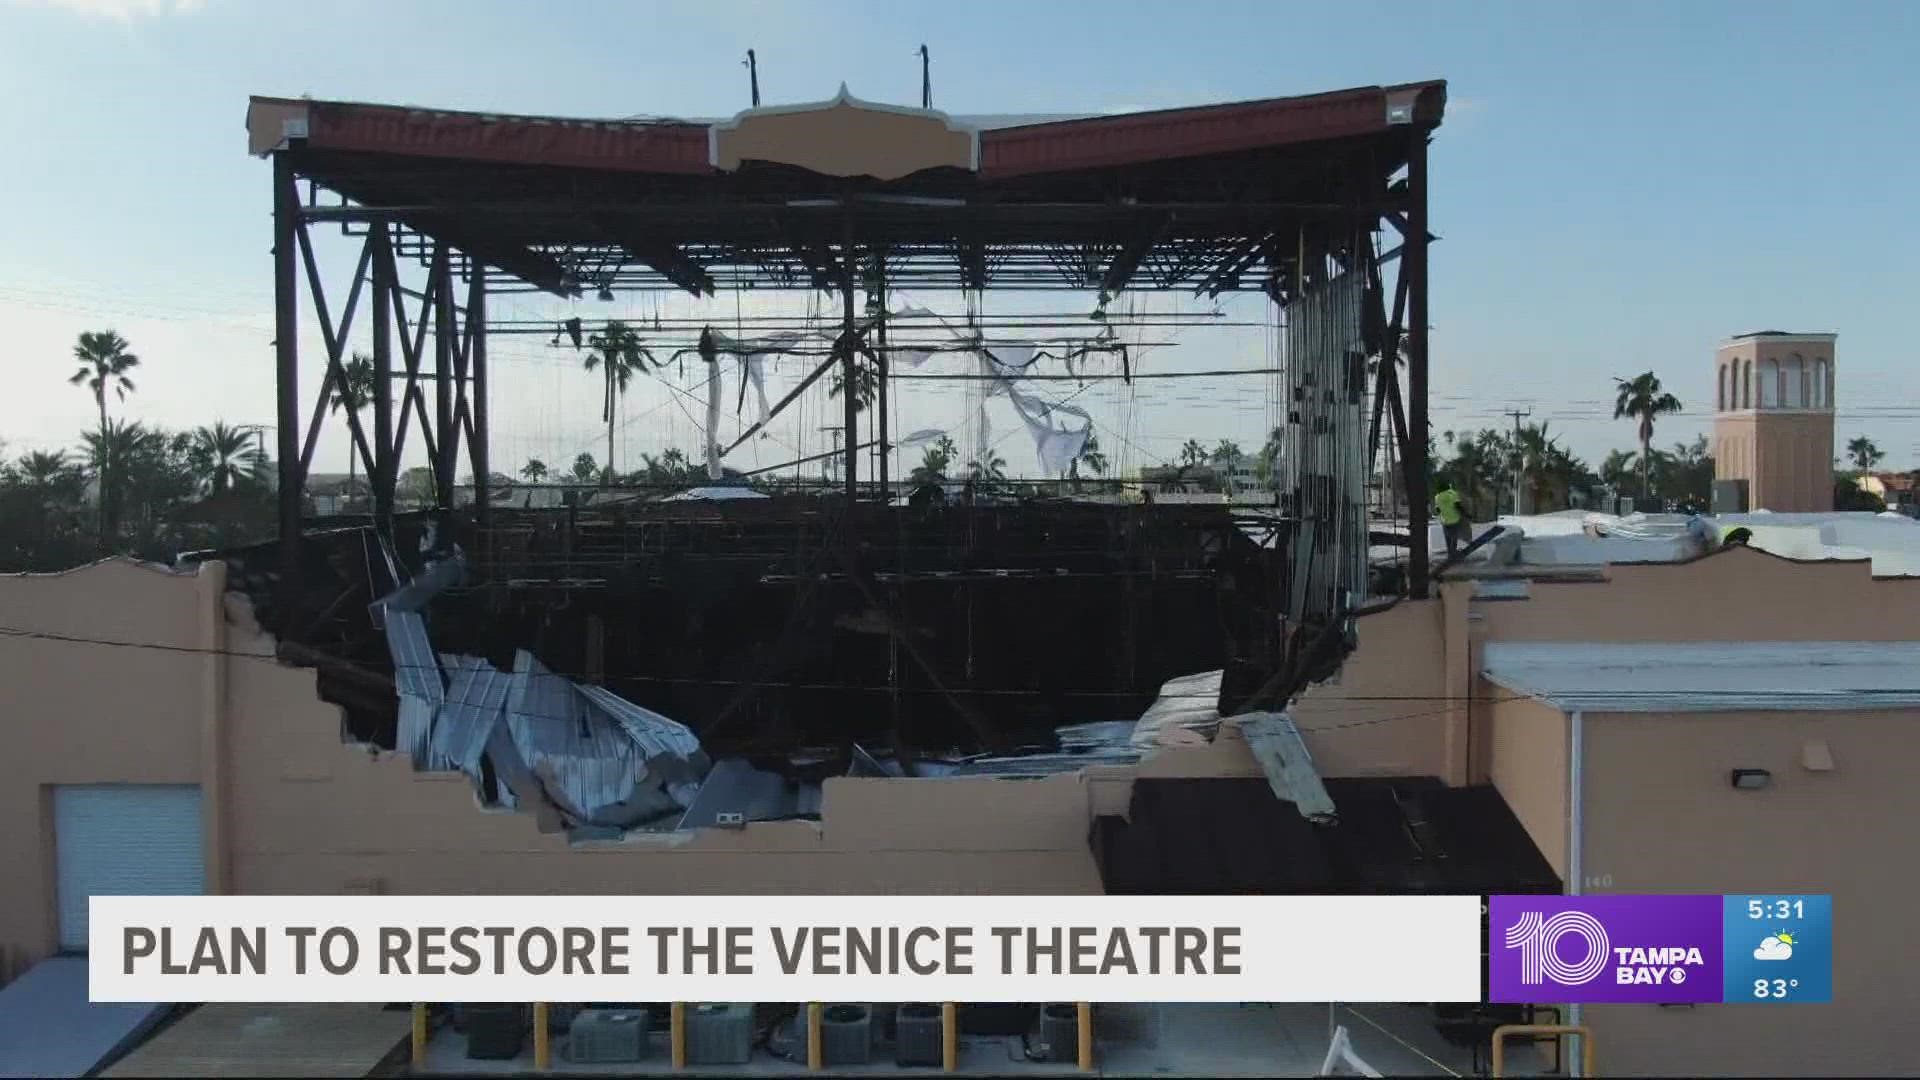 Crews have already built a new stage and painted it black.